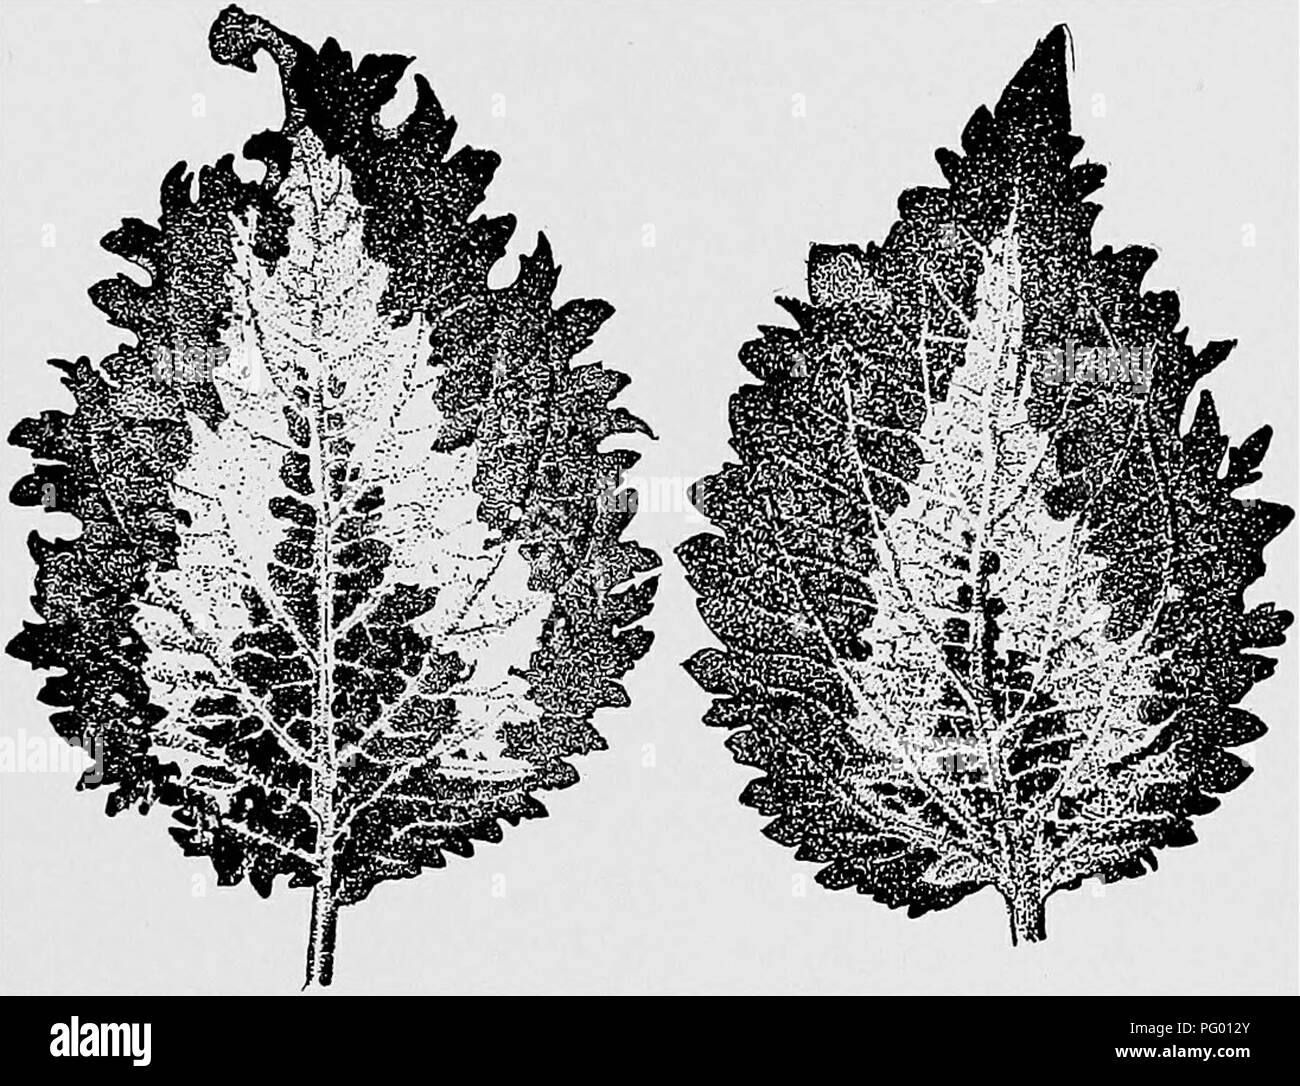 . Lessons in botany. Botany. HOW PLANTS GET THEIR CARBON FOOD. 75 of the leaf, while the white part of the leaf is still uncolored. This is well shown in fig. 59, which is from a photograph of another coleus leaf treated with the iodine solution. 138. Green parts of plants form starch when exposed to light.—Thus we find that in the case of all the green plants we. Fig. 58. Leaf of coleus showing green and white areas, before treatment with iodine. Fig. 59. Similar leaf treated with iodine, the starch re- action only showing where the leaf was green. have examined, starch is present in the gree Stock Photo